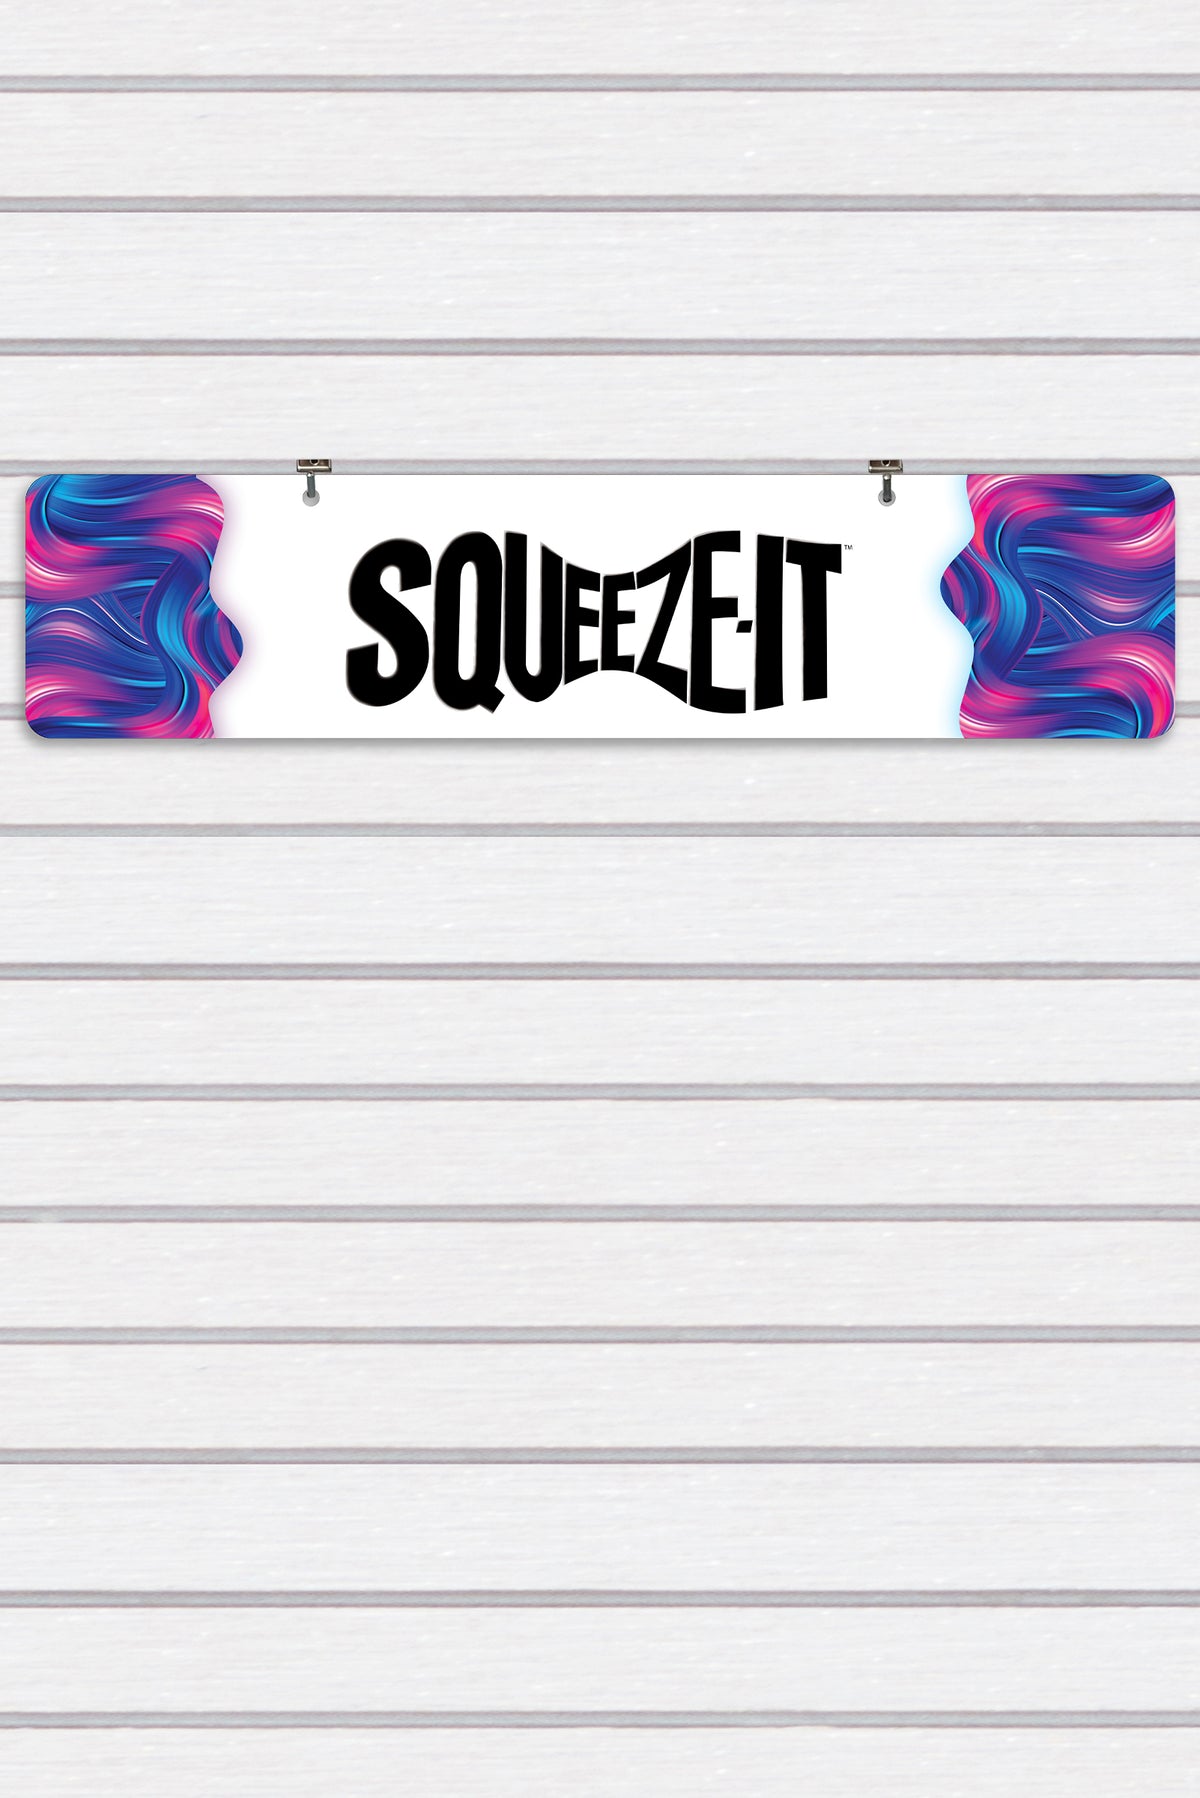 Squeeze-It Display Sign